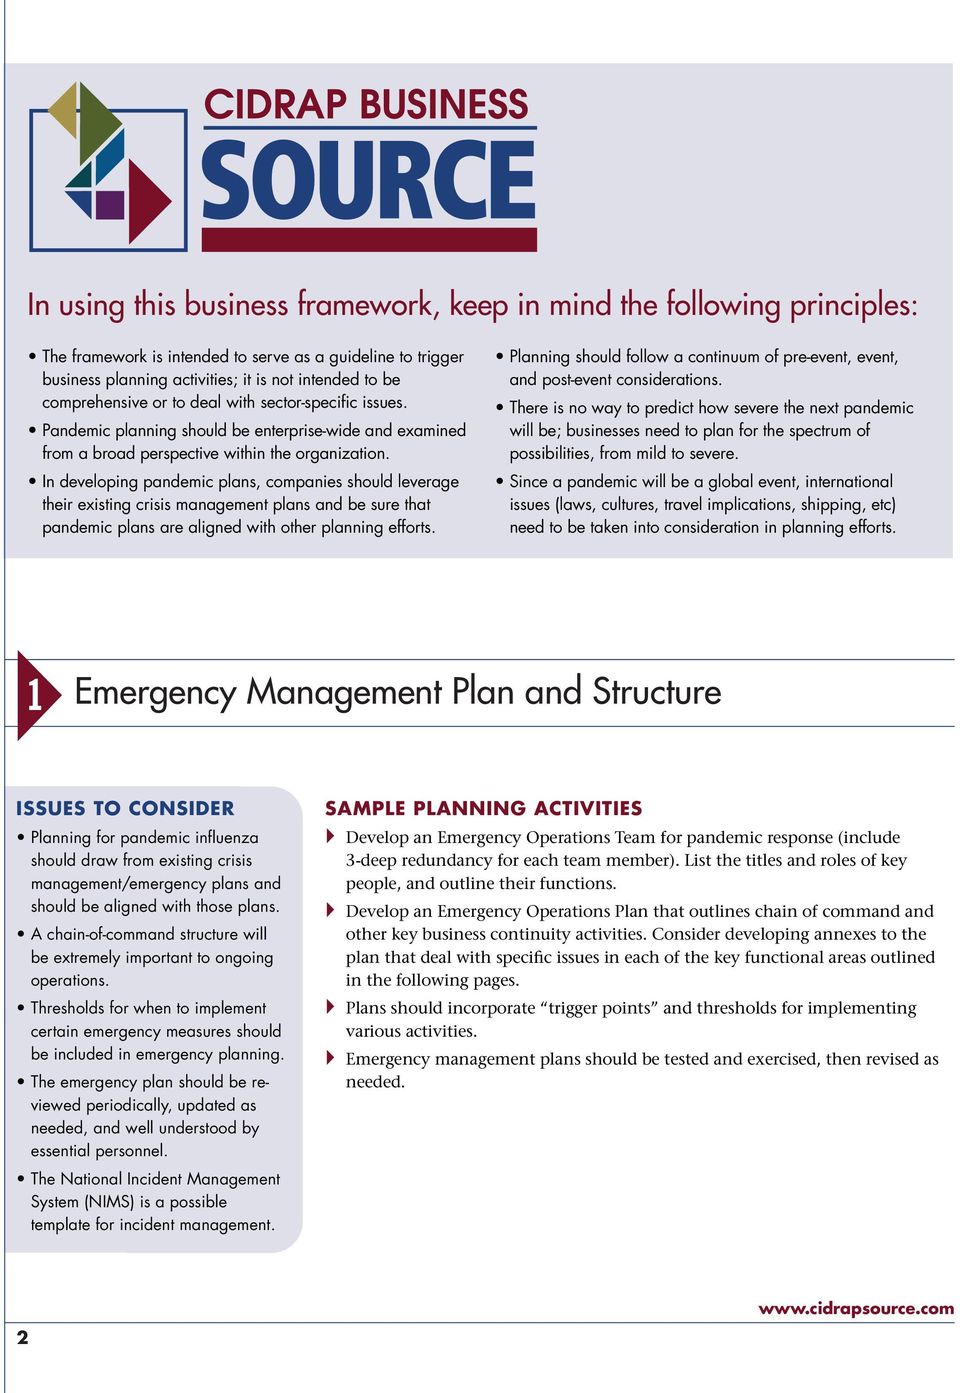 In developing pandemic plans, companies should leverage their existing crisis management plans and be sure that pandemic plans are aligned with other planning efforts.